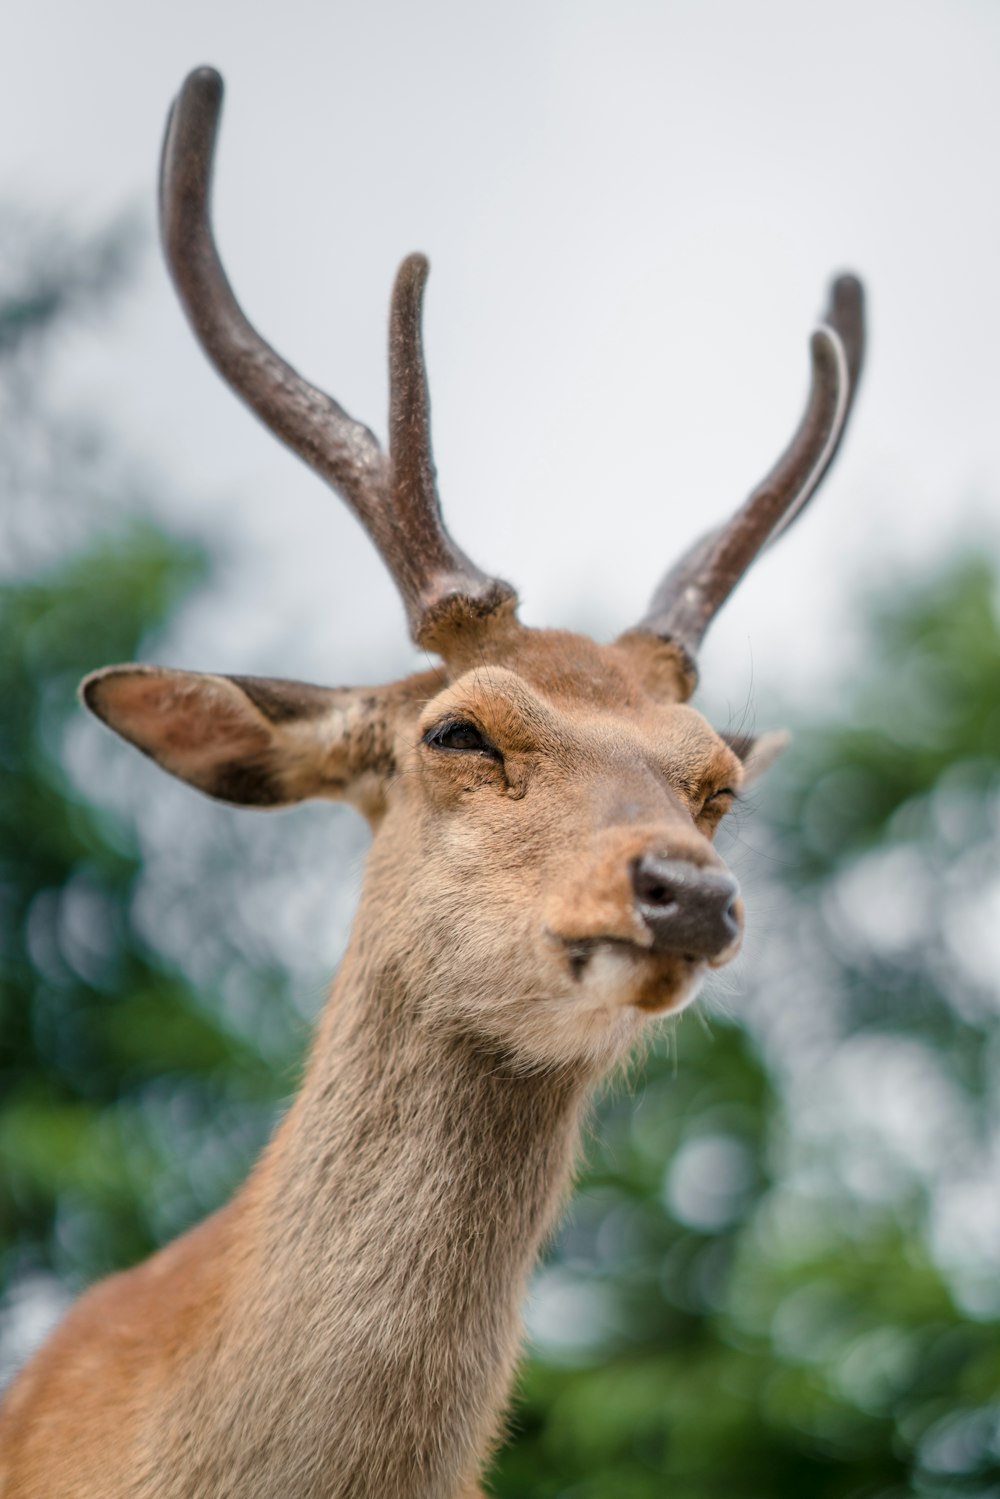 a close up of a deer's head with trees in the background